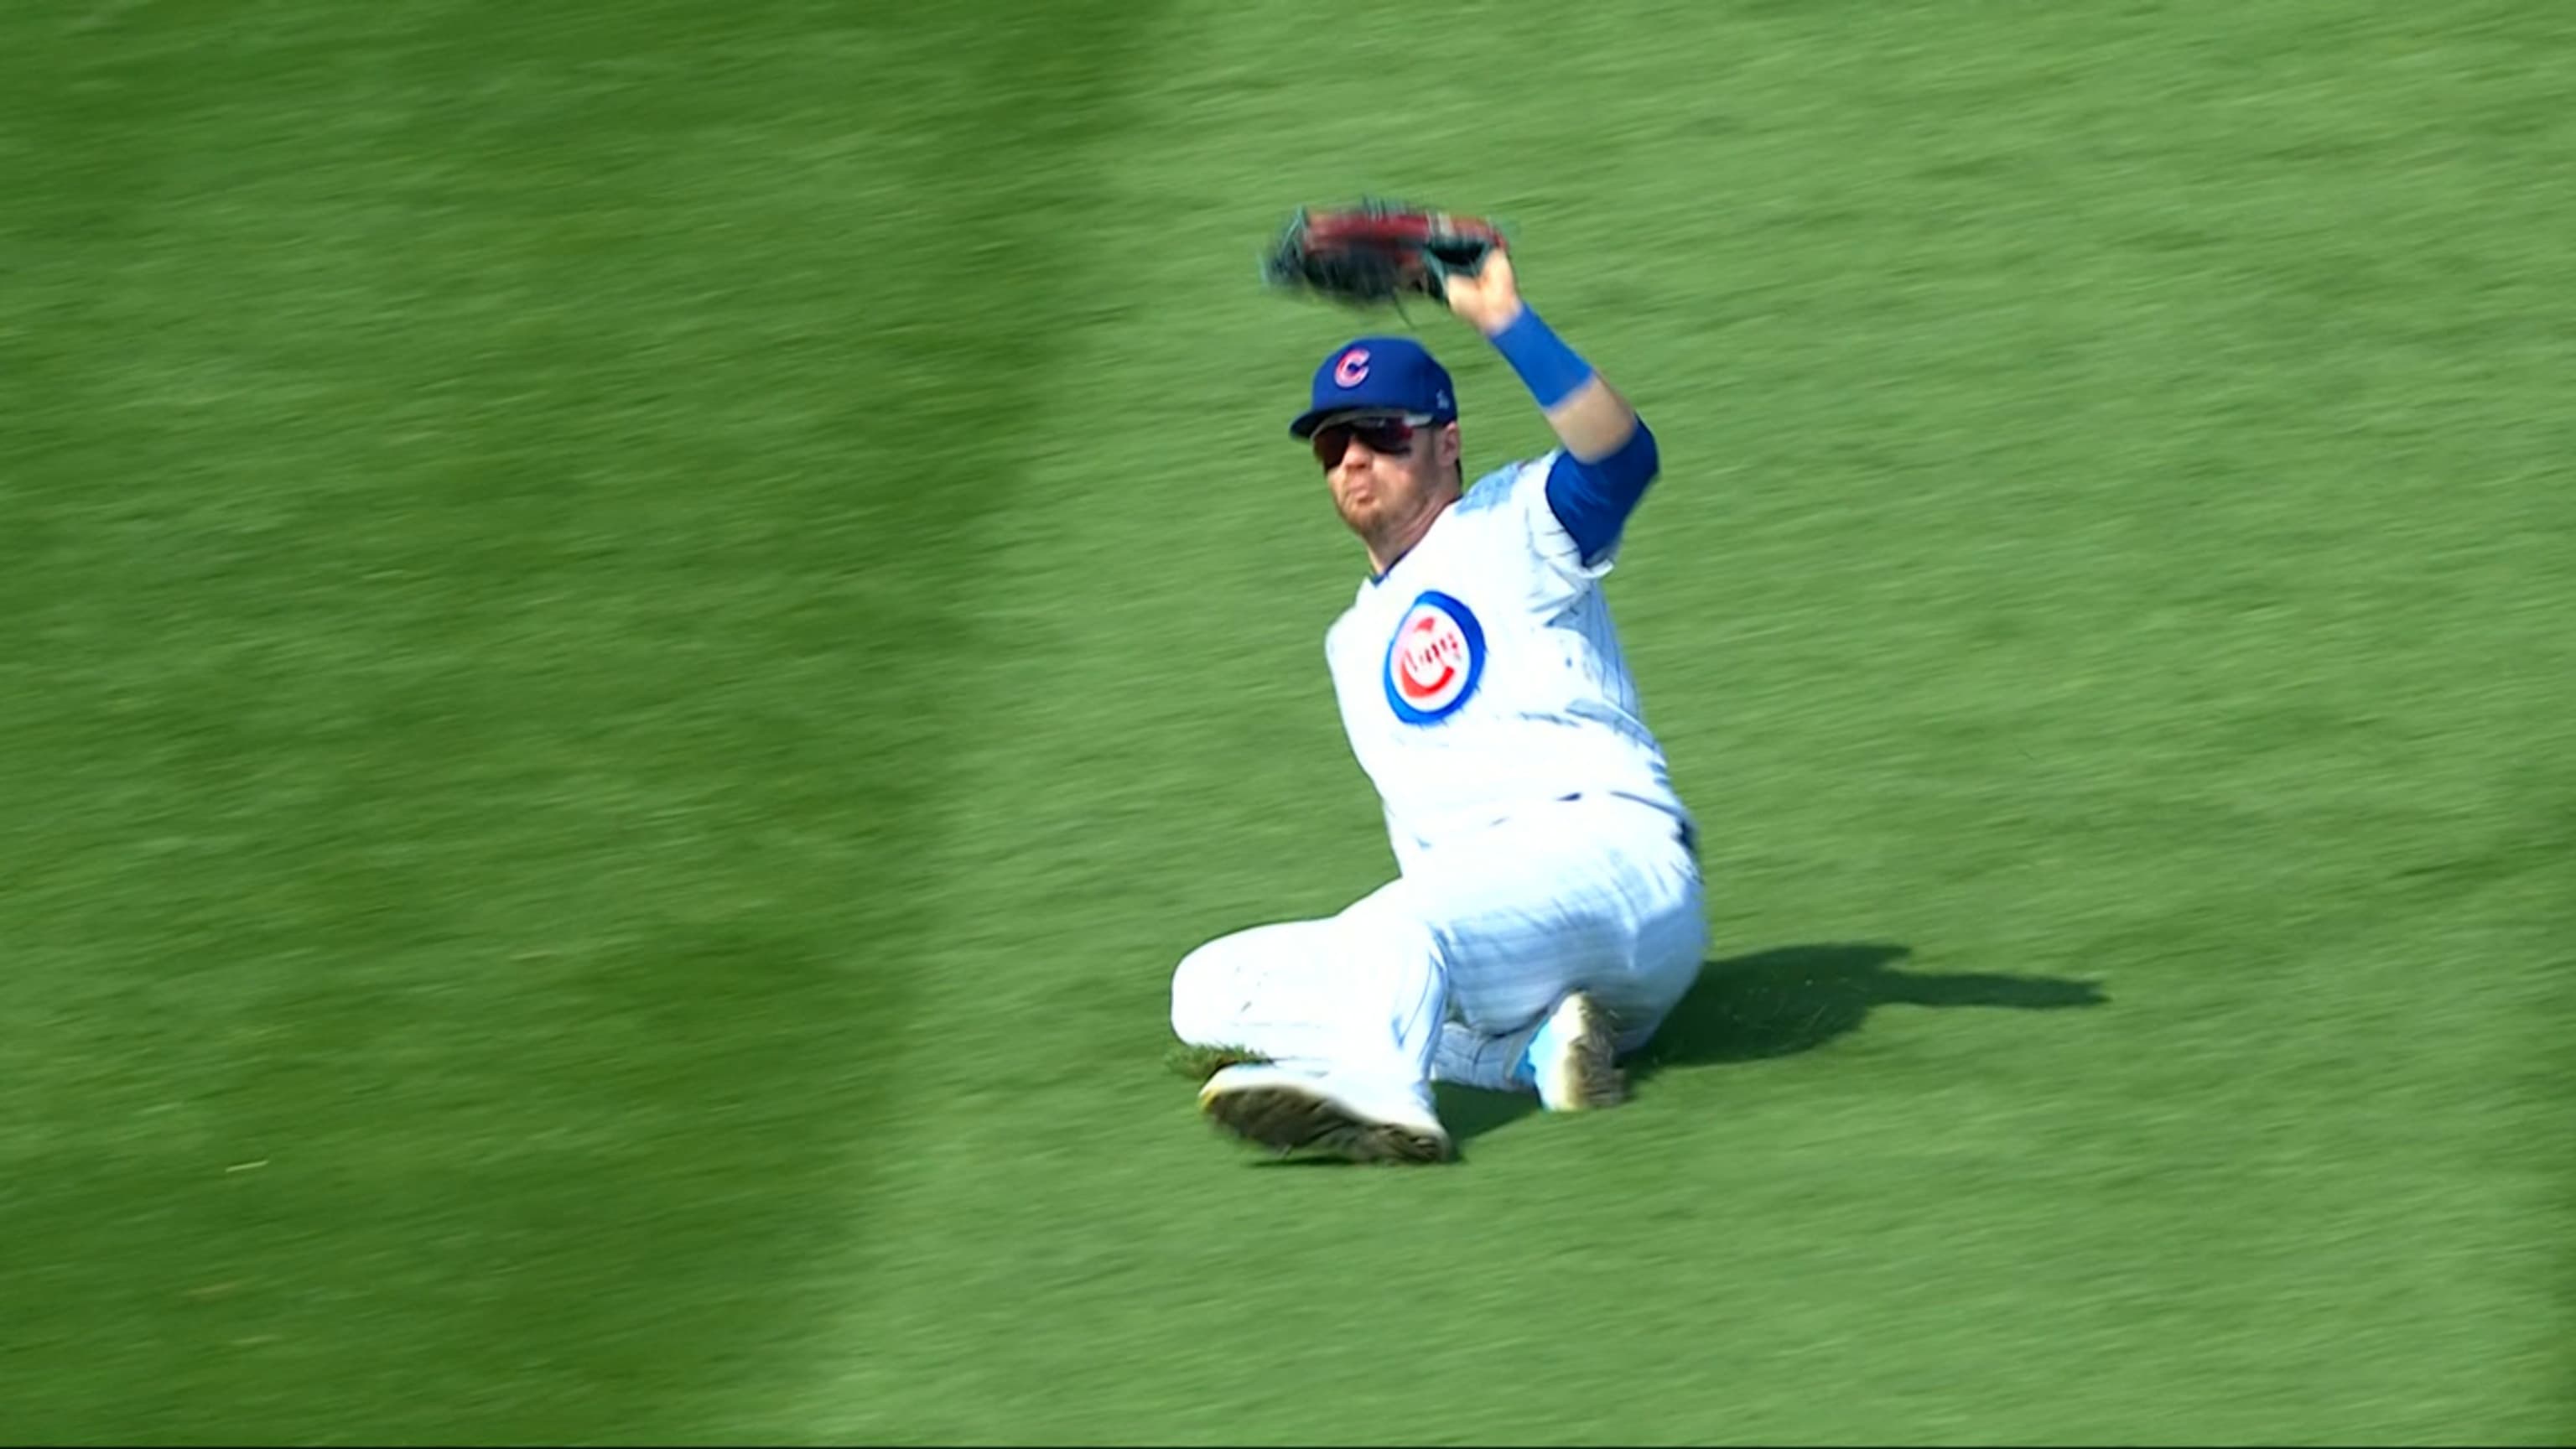 Left fielder Ian Happ saves Cubs with 2 late throws to plate in wild 7-6  win over Brewers in 11